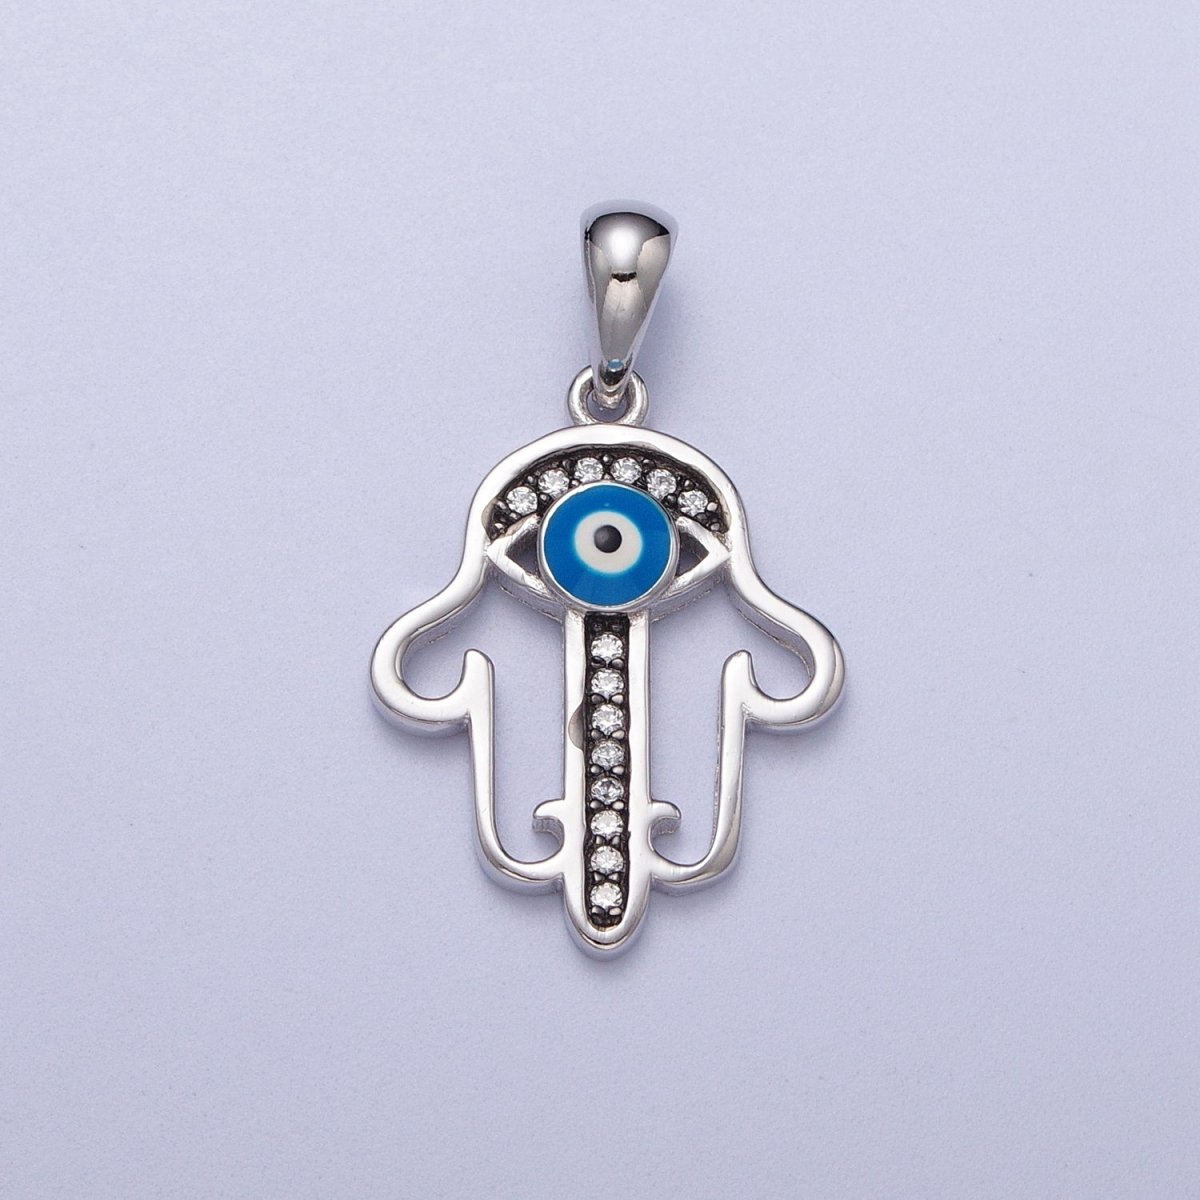 S925 Sterling Silver Hamsa Pendant Hand of Fatima Charm Evil Eye Amulet Religious Protection Pendant Dainty Silver Ancient Symbol SL-407 - DLUXCA